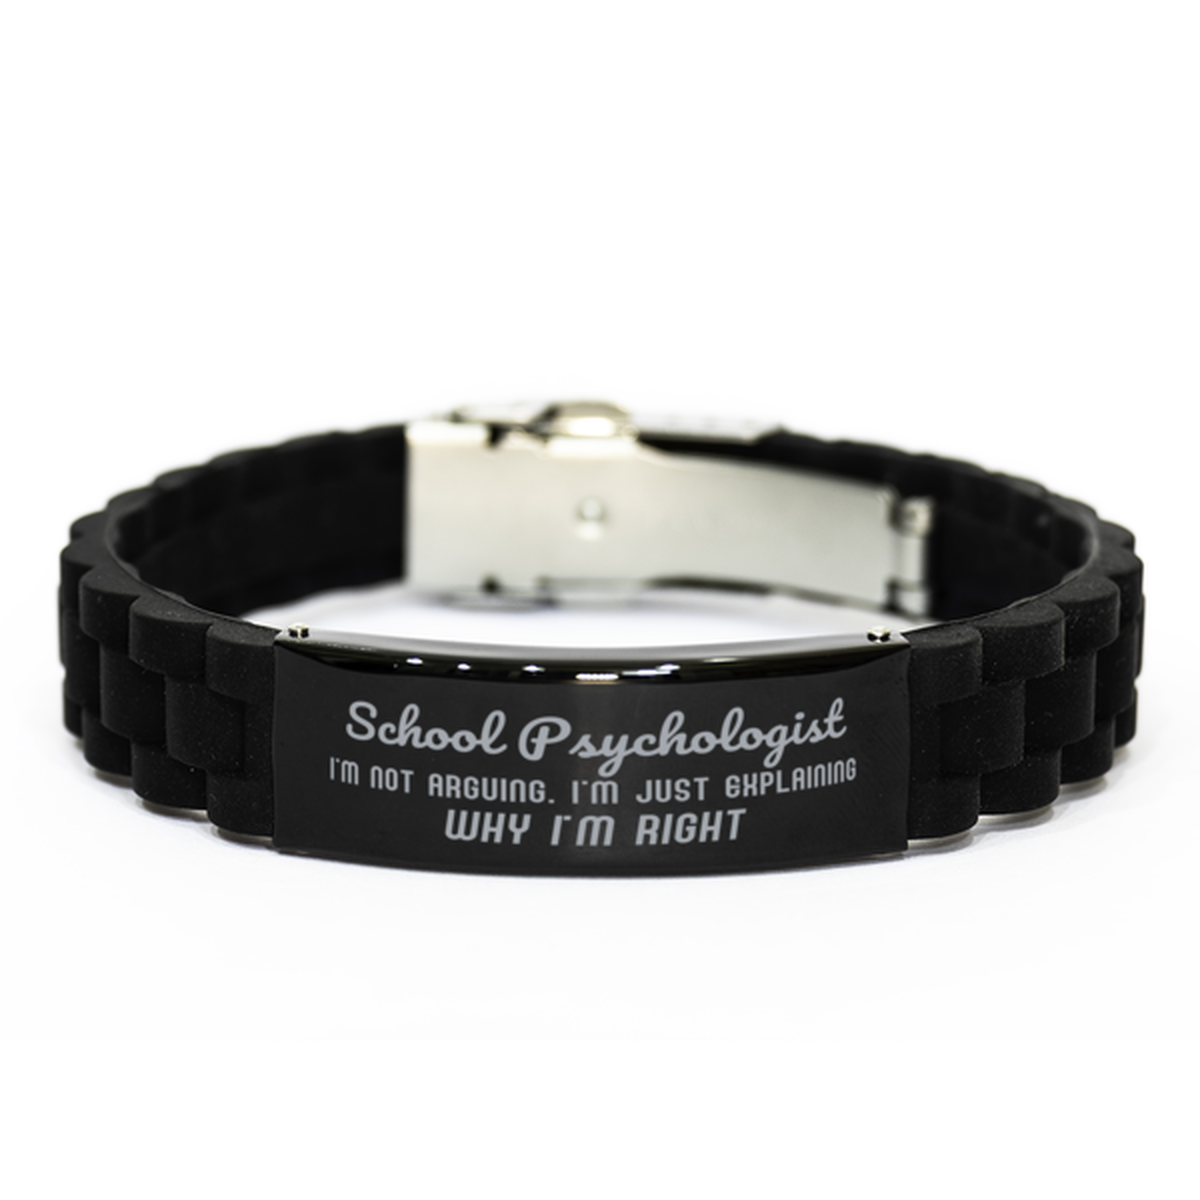 School Psychologist I'm not Arguing. I'm Just Explaining Why I'm RIGHT Black Glidelock Clasp Bracelet, Funny Saying Quote School Psychologist Gifts For School Psychologist Graduation Birthday Christmas Gifts for Men Women Coworker